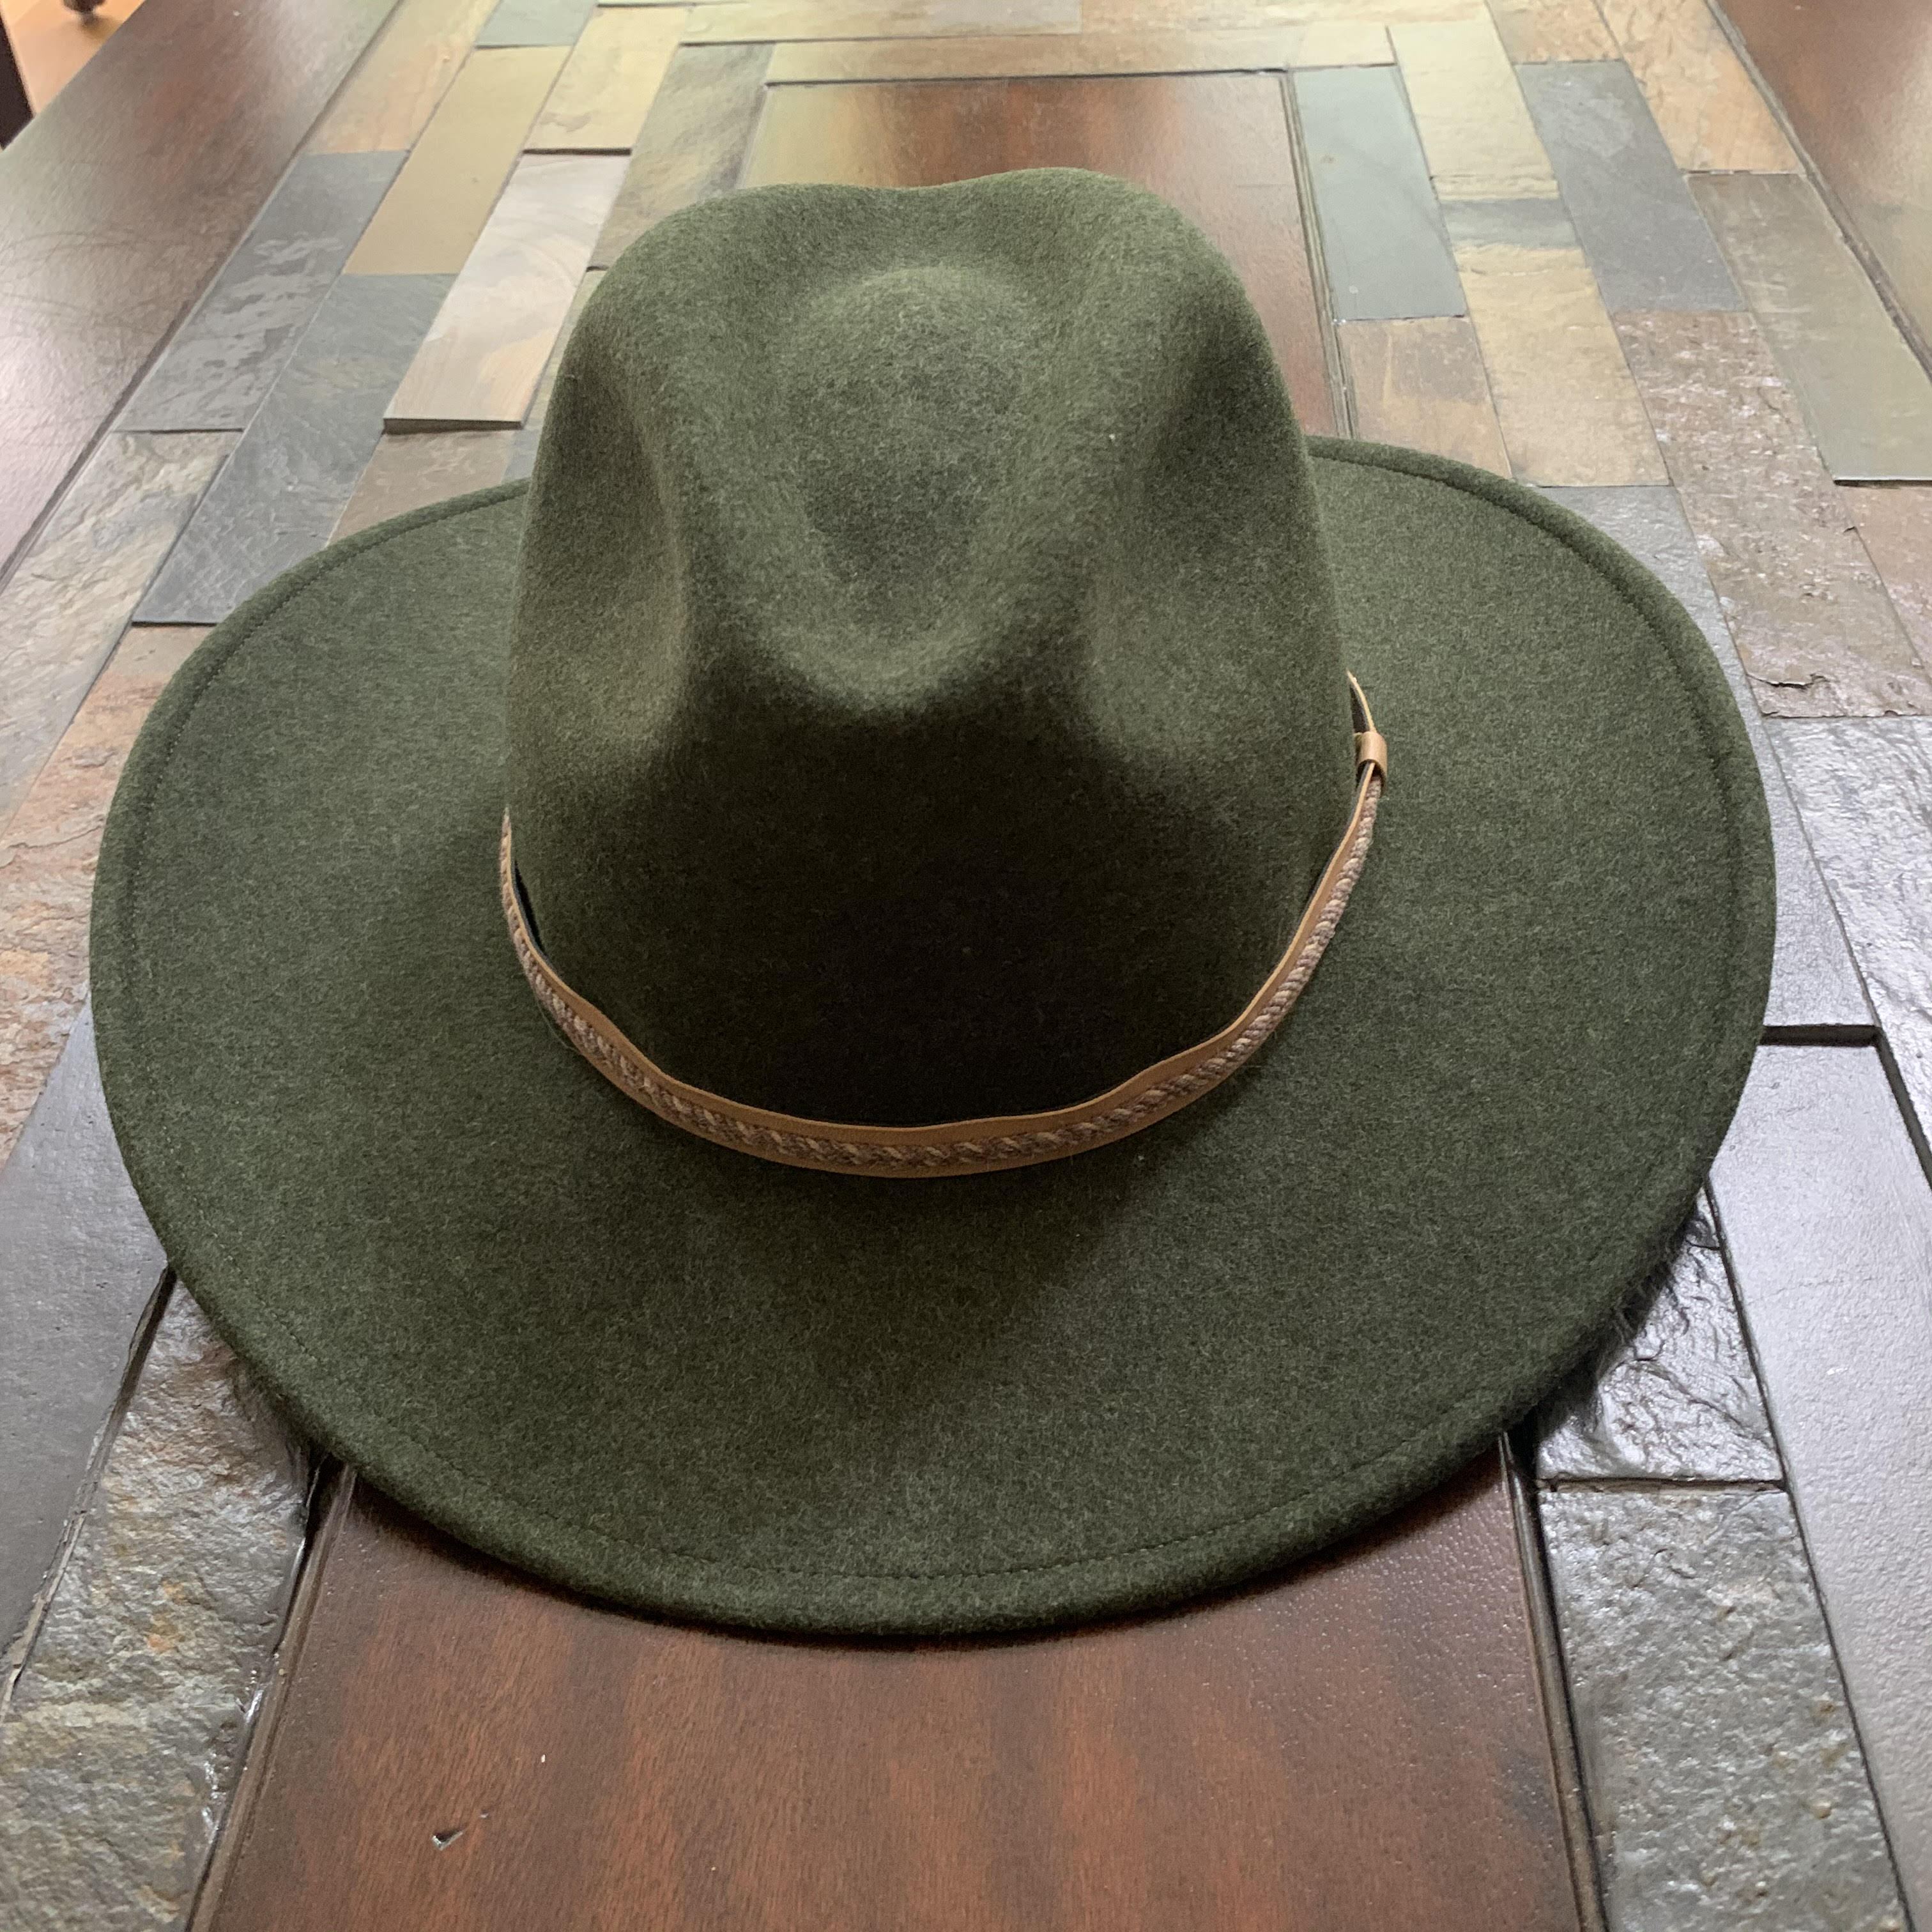 Stetson pindale crushable hat